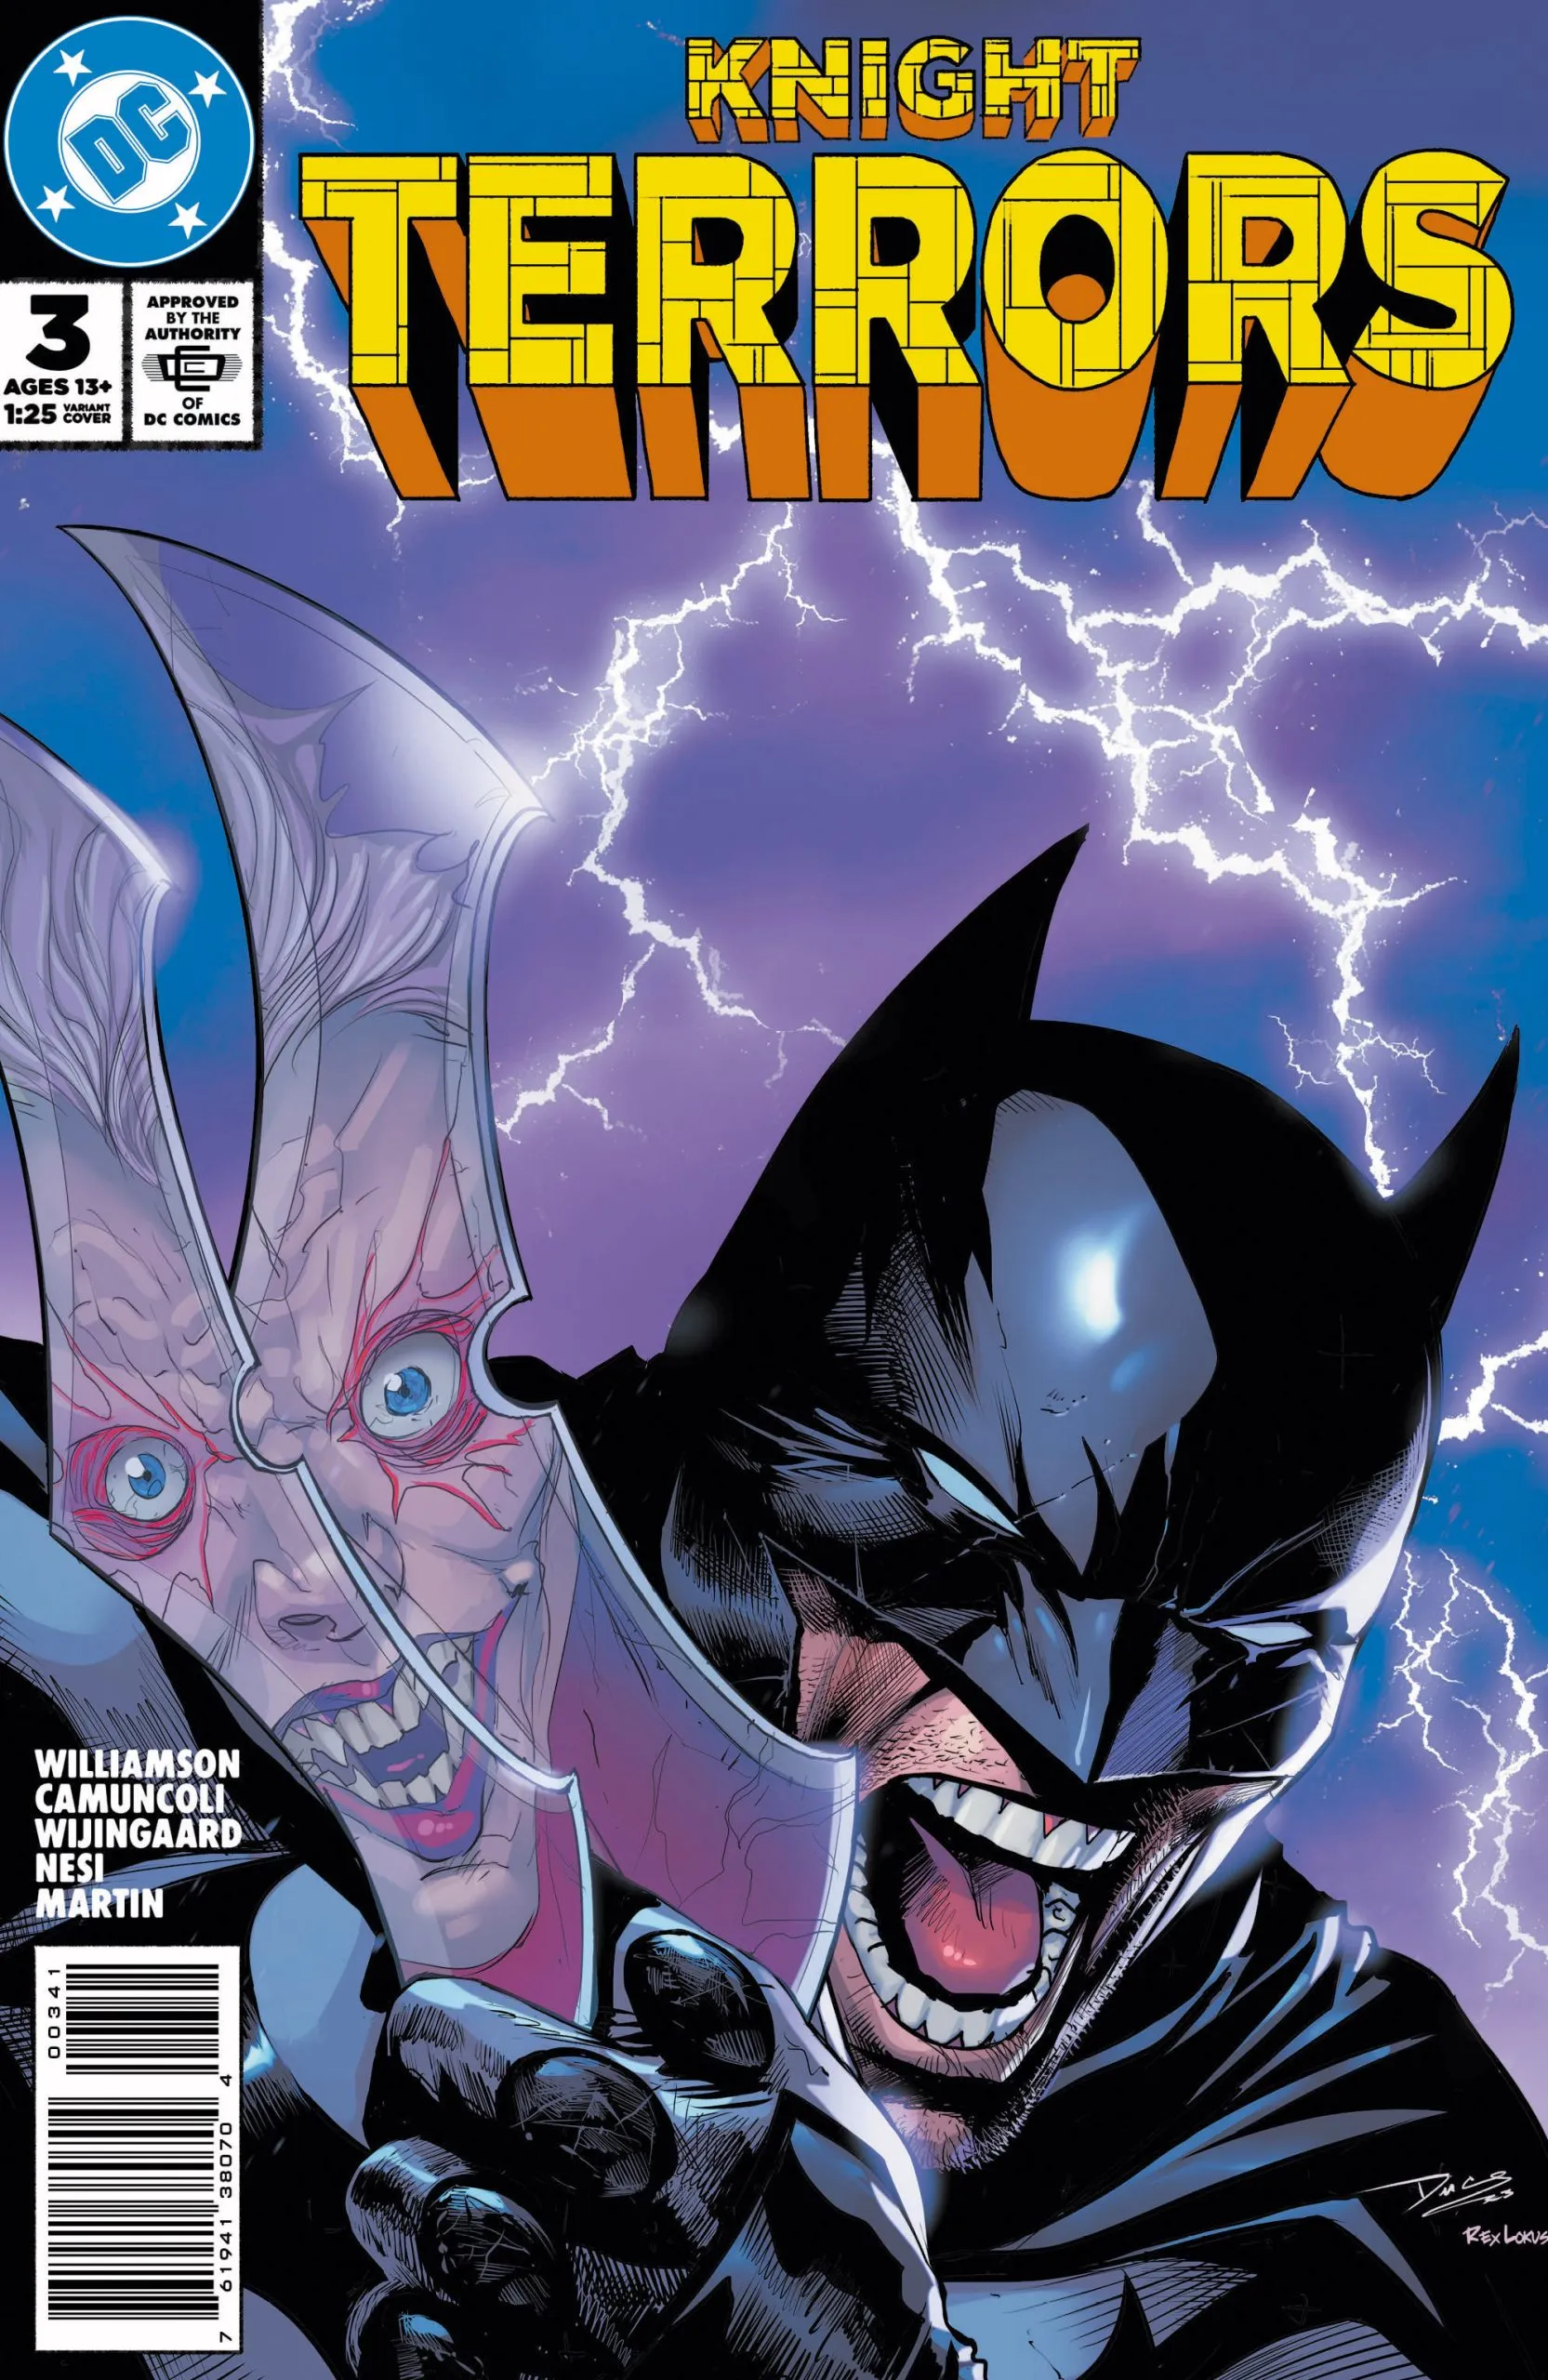 DC BRINGS KNIGHT TERRORS AND MANGA TO COMICSPRO – FIRST COMICS NEWS